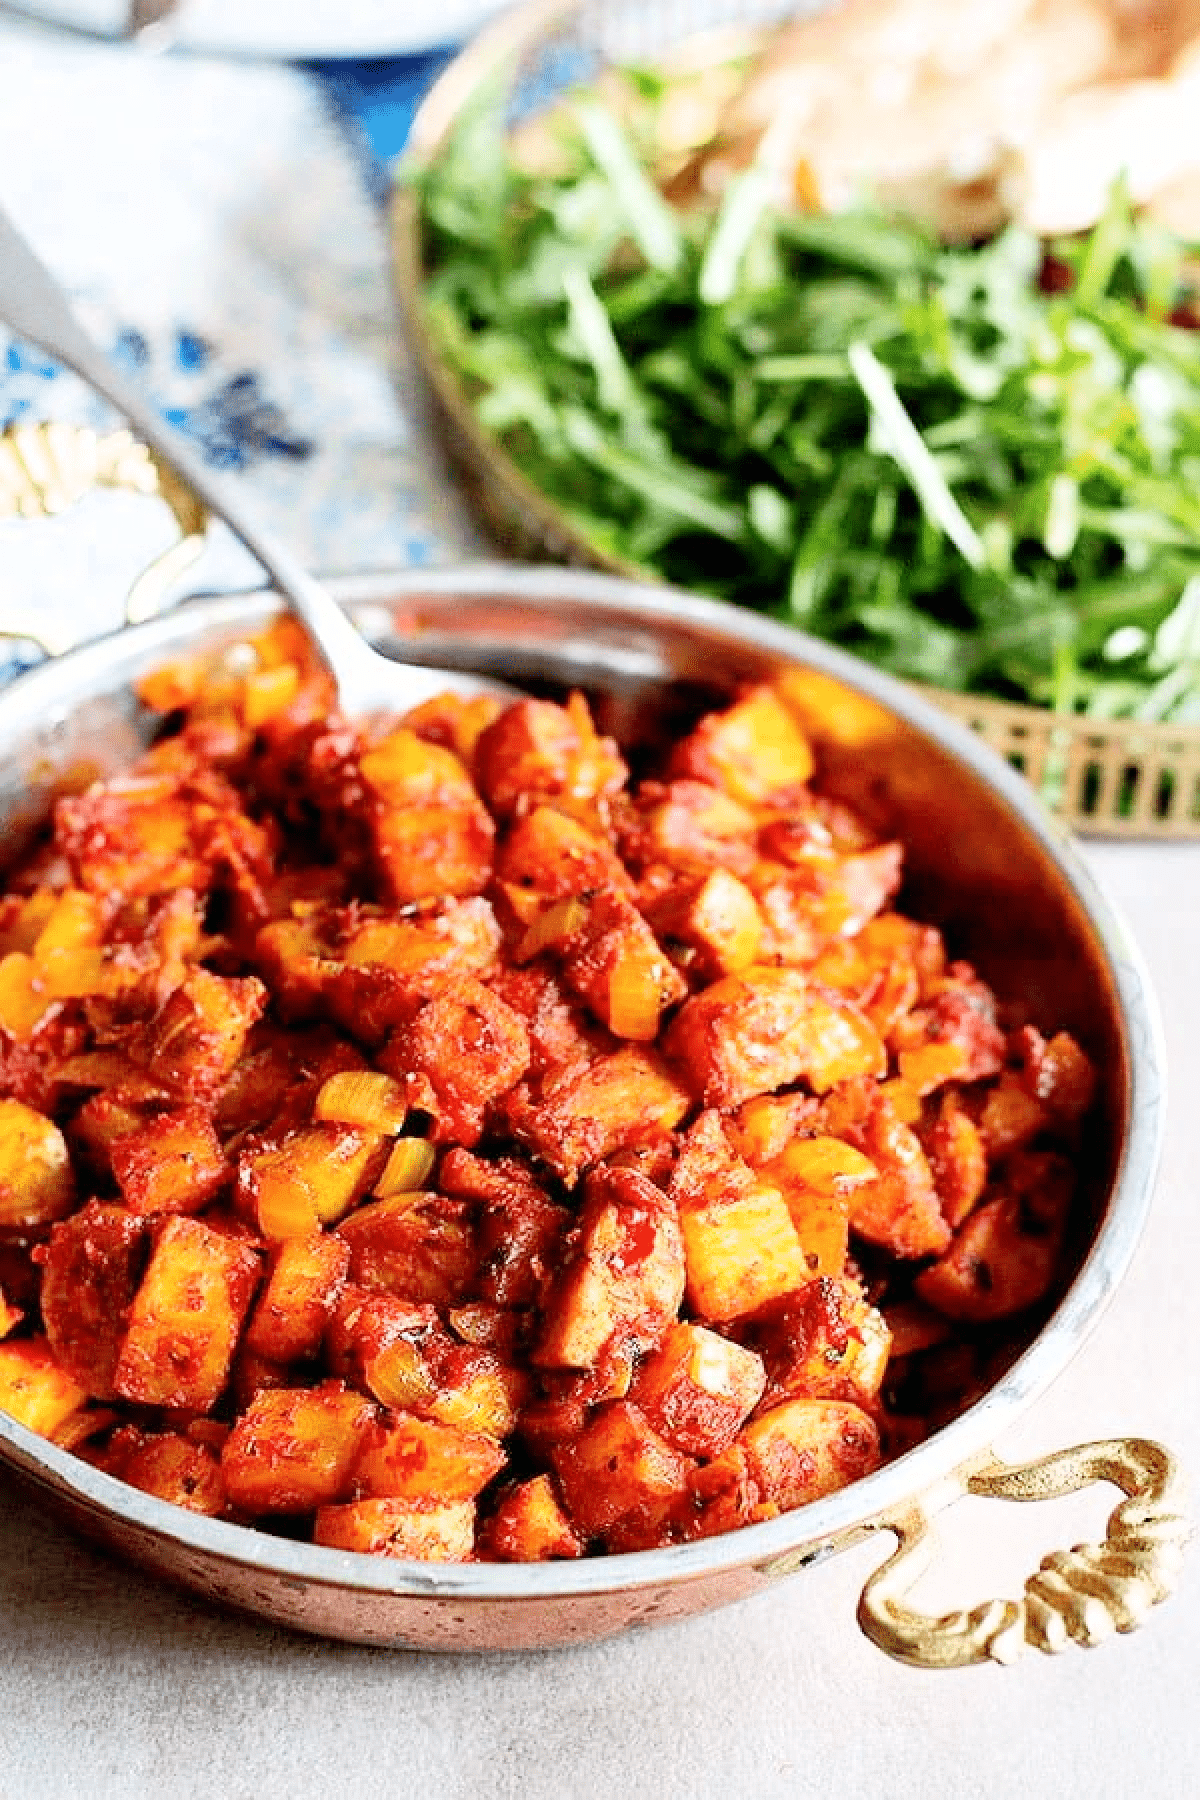 A Persian fast food favorite, this Persian sausage and potato skillet is quick to make and requires a handful of ingredients. We love to have it with Iranian bread but it would go great with a baguette, too!
